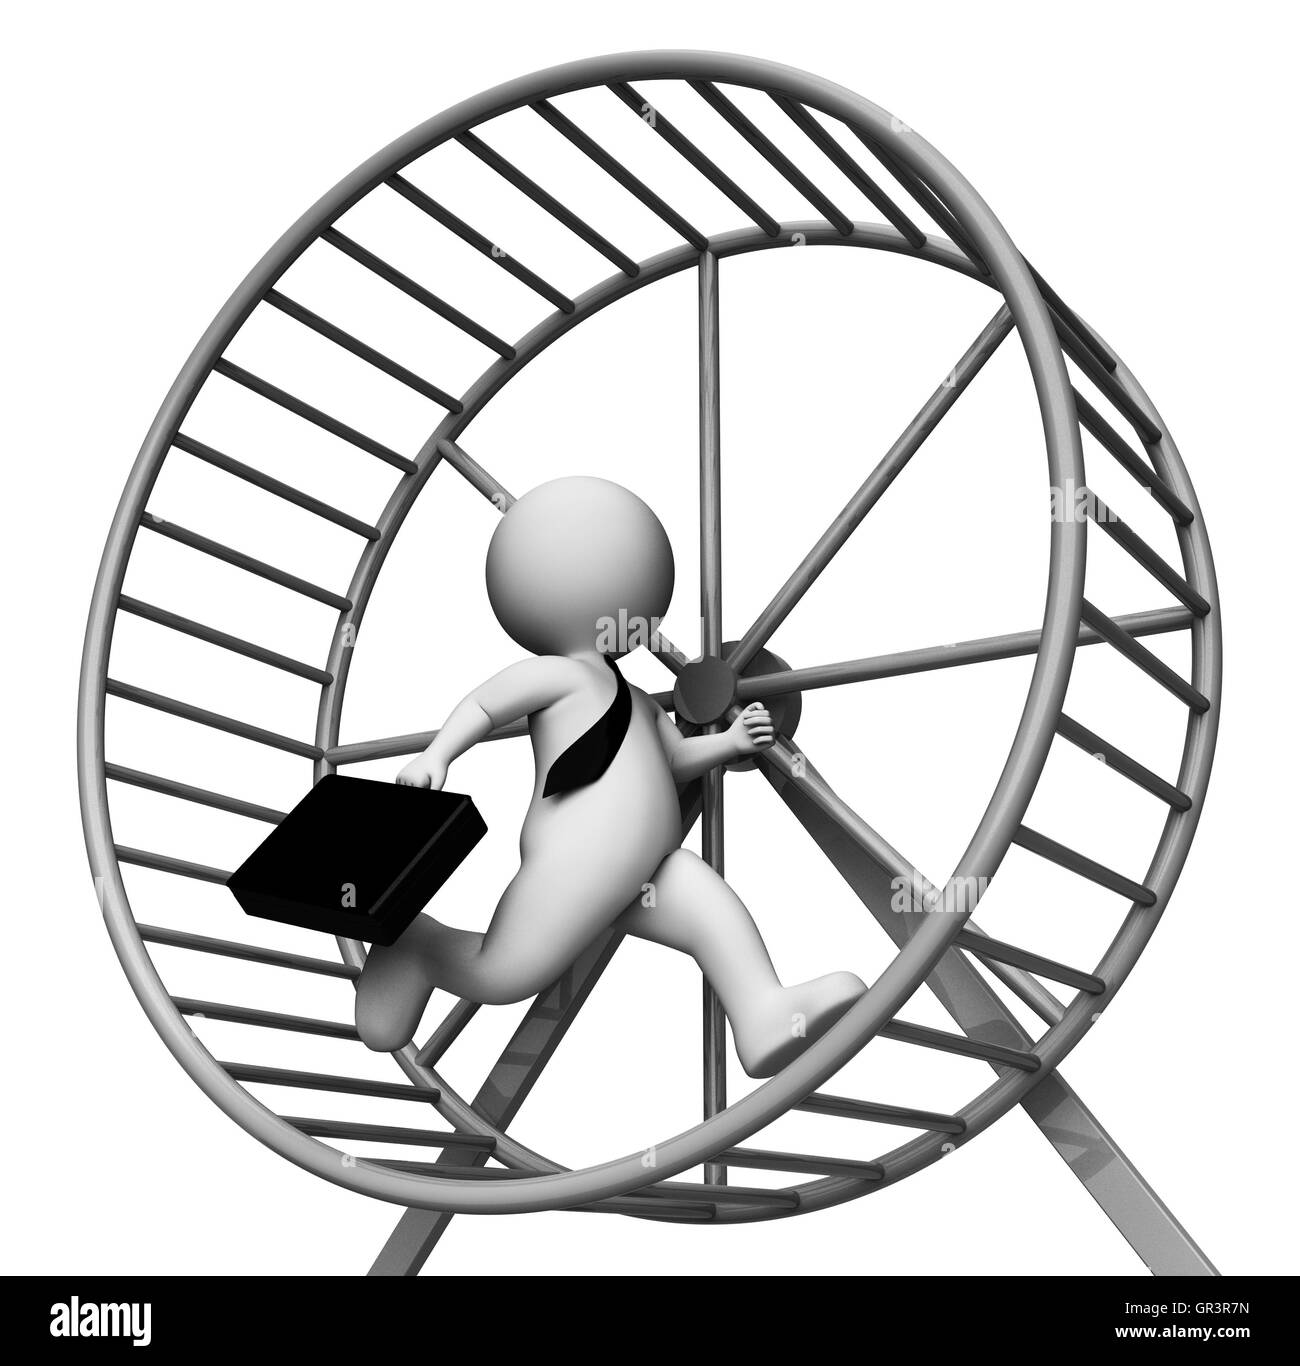 Hamster Wheel Meaning Business Person And Burdensome 3d Rendering Stock Photo